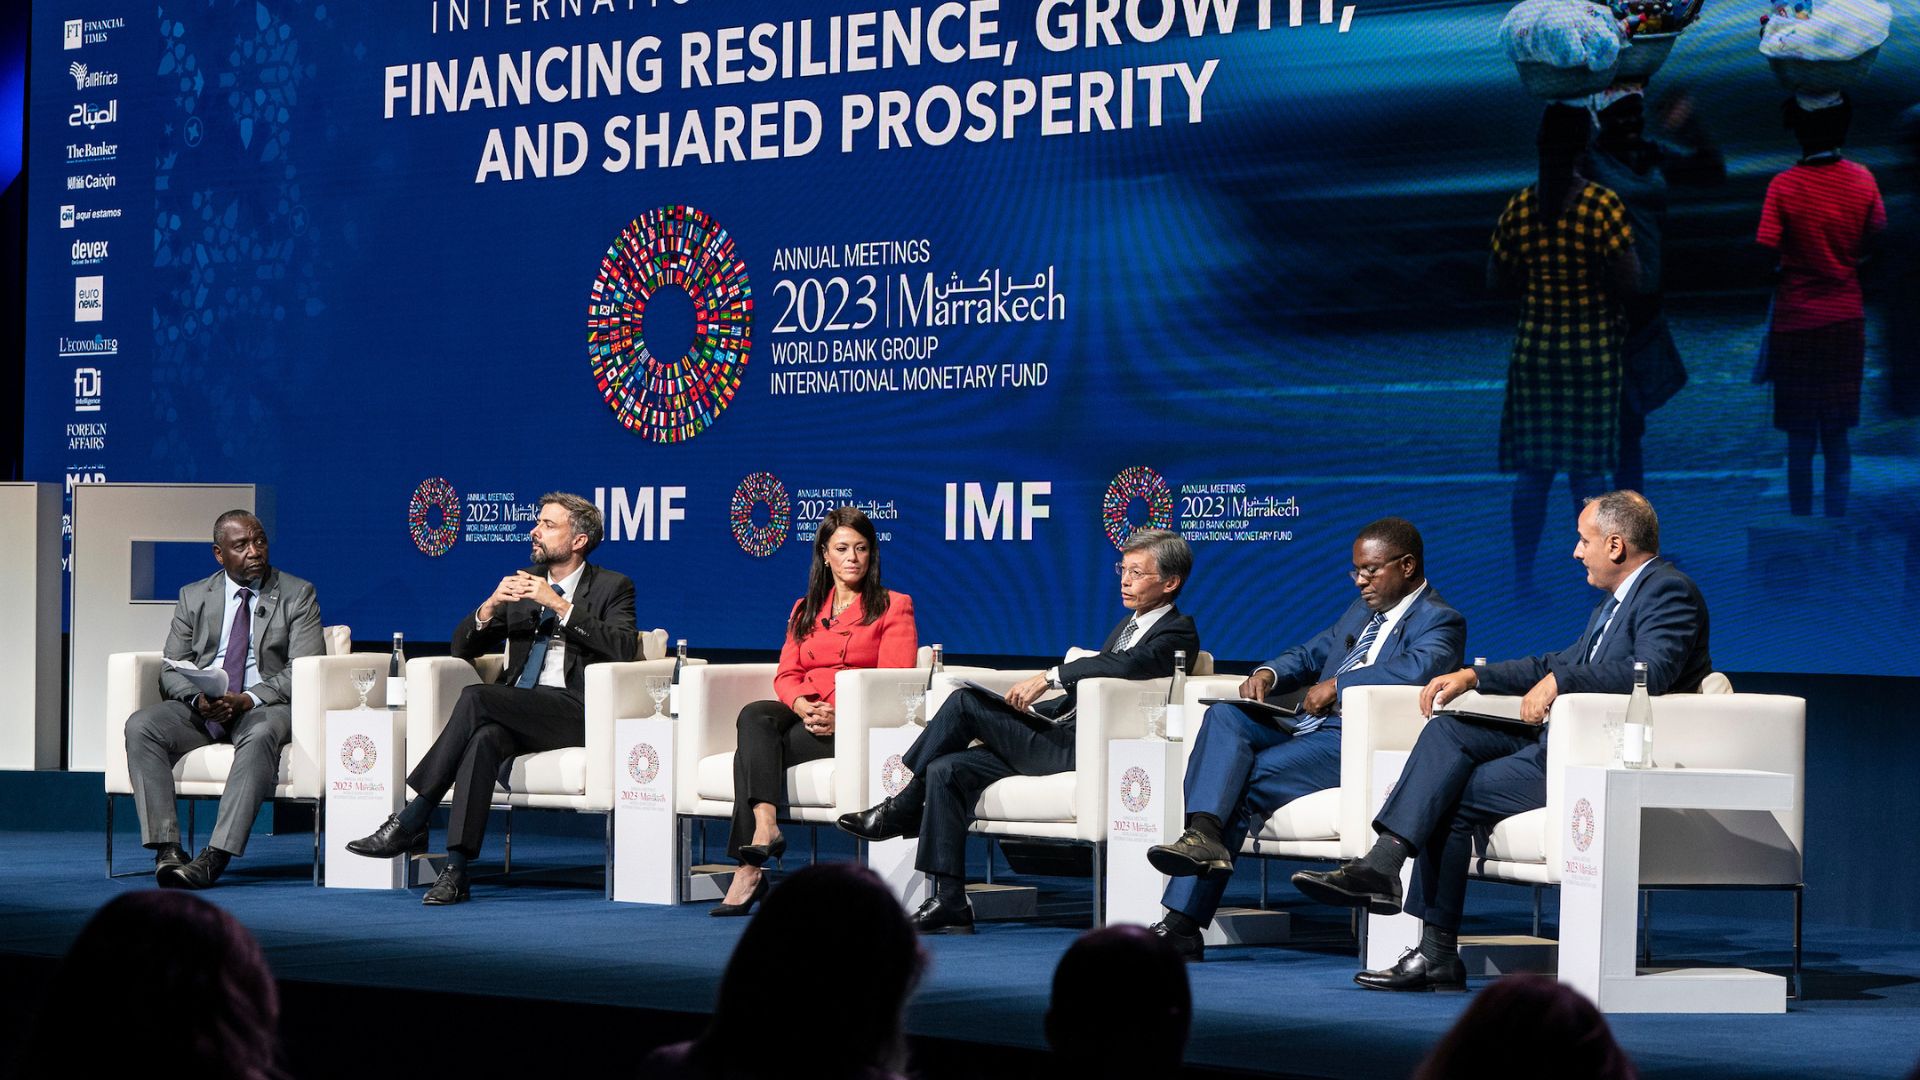 Financing Resilience, Growth and Shared Prosperity seminar